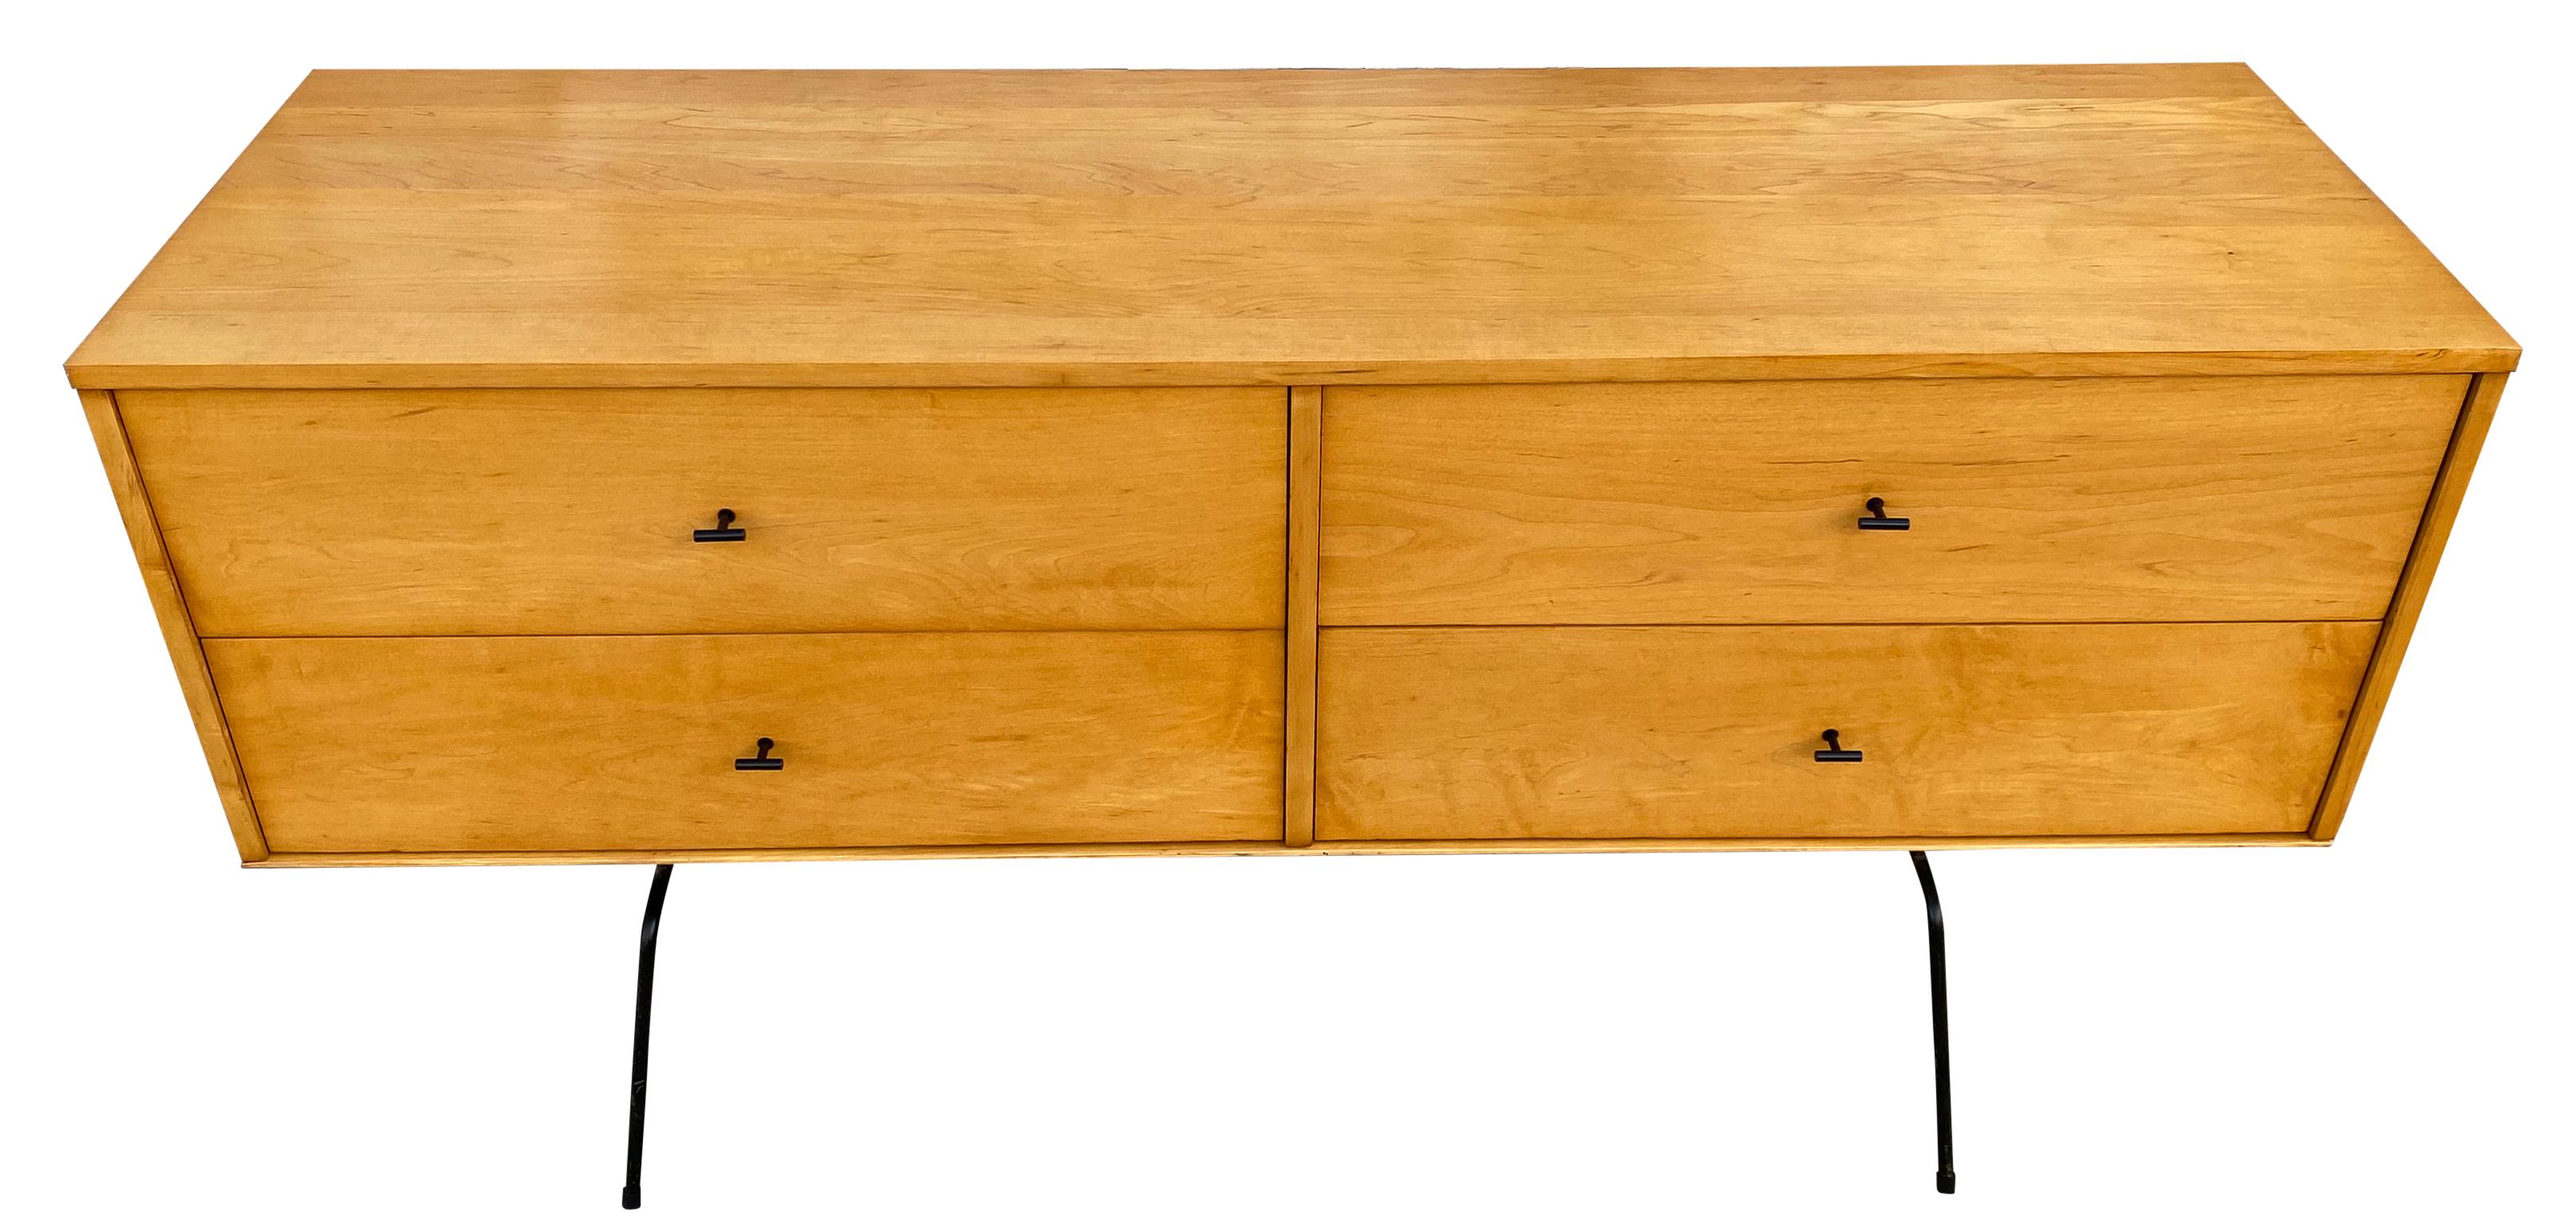 Rare midcentury low dresser credenza by Paul McCobb circa 1950 Planner Group #1504 with 4 low drawers - solid maple construction has a raw blonde maple lacquered finish. All original Black Steel T Pulls. Sits on a 60